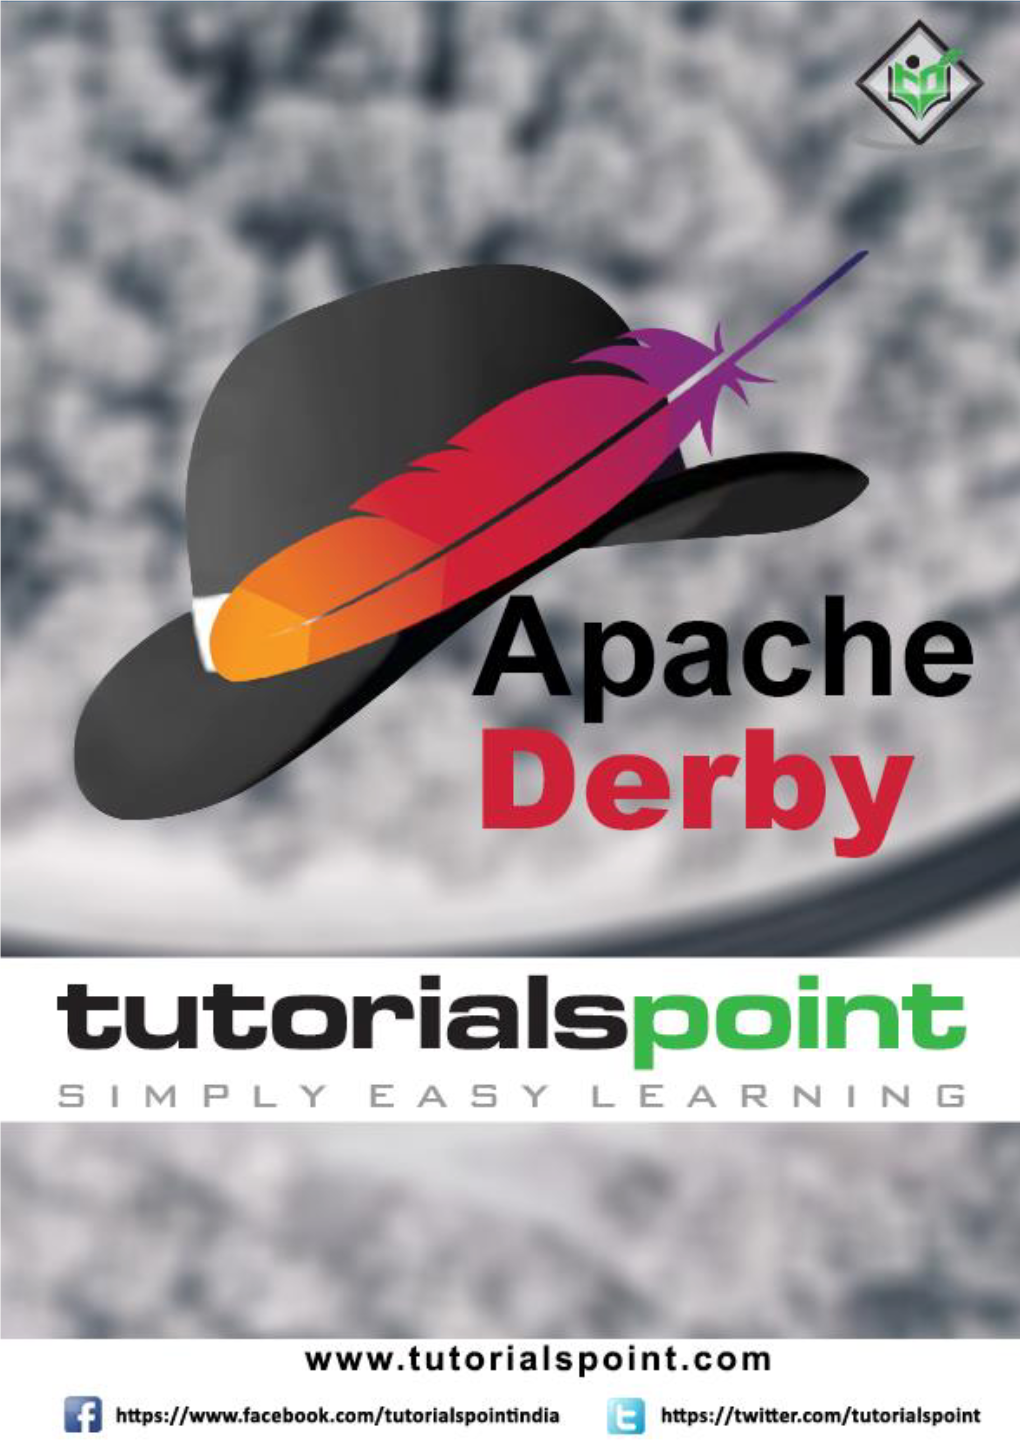 Apache Derby Is a Relational Database Management System Which Is Fully Based on (Written/Implemented In) Java Programming Language